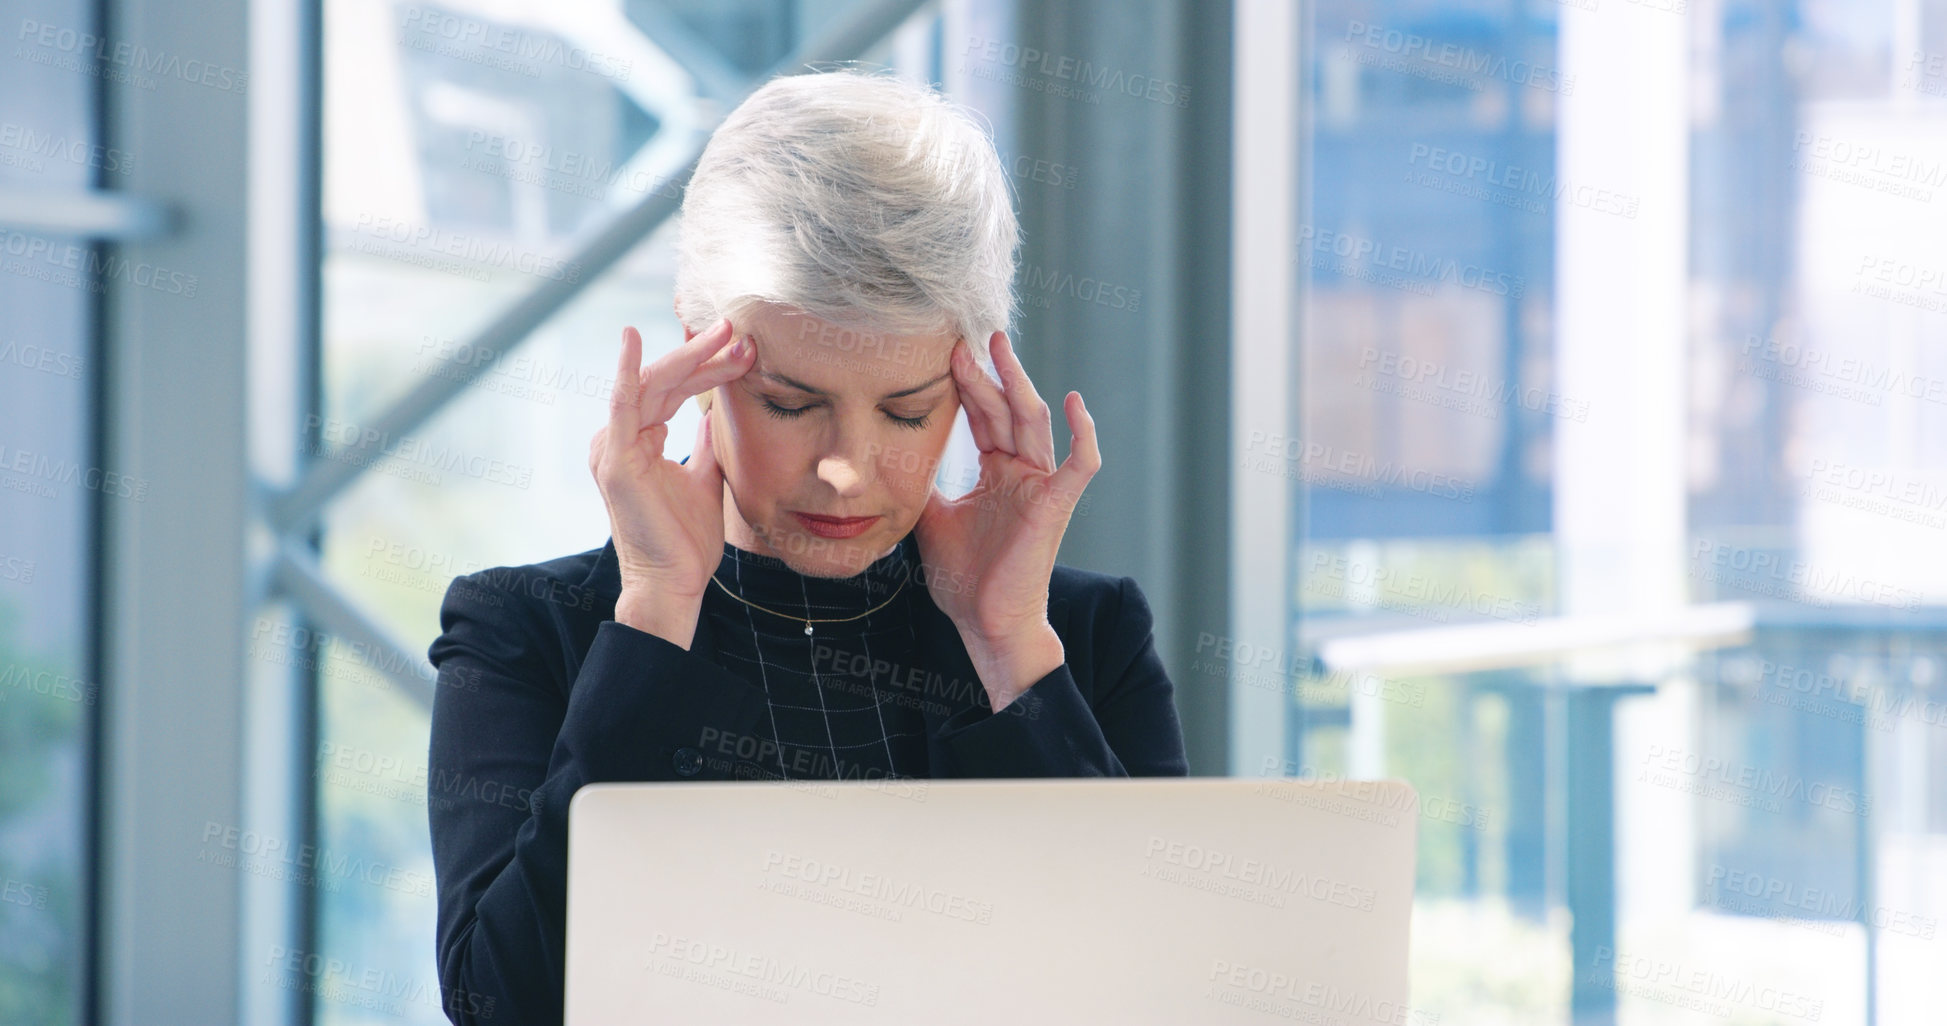 Buy stock photo Shot of a mature businesswoman looking stressed out while working in an office